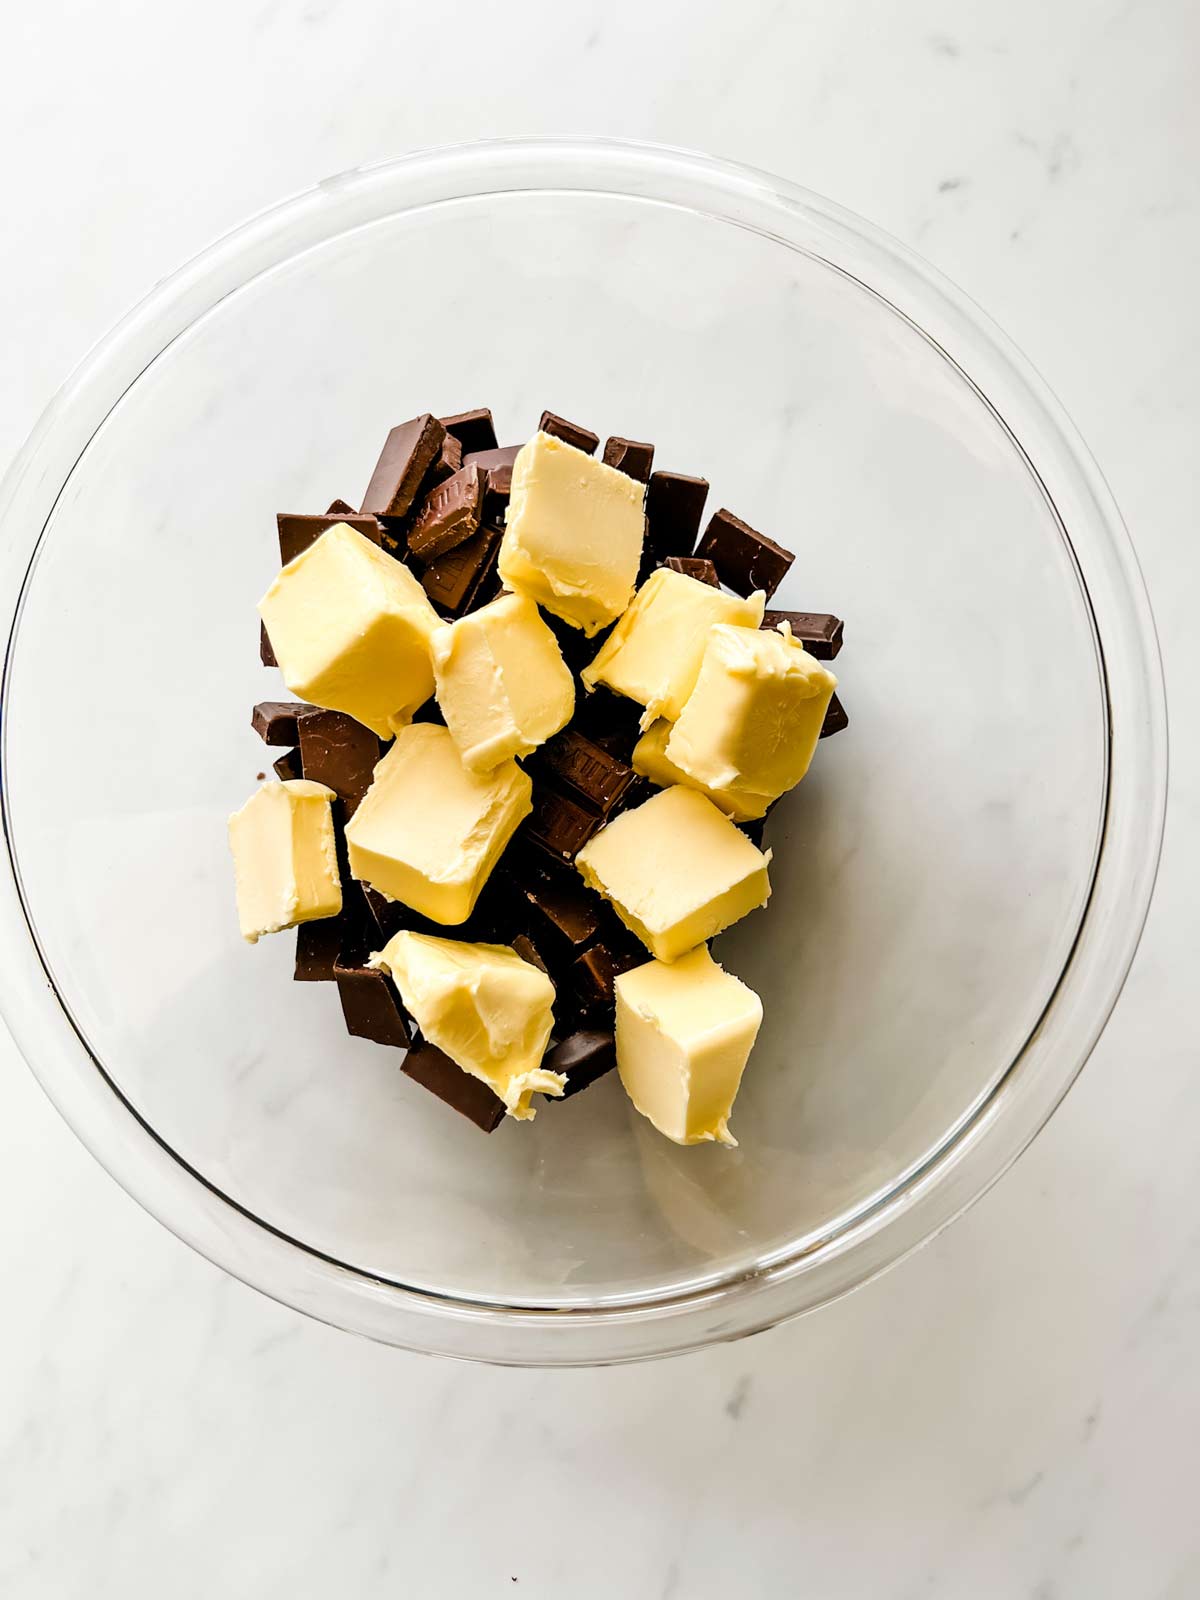 Photo of chocolate and butter in a glass bowl.